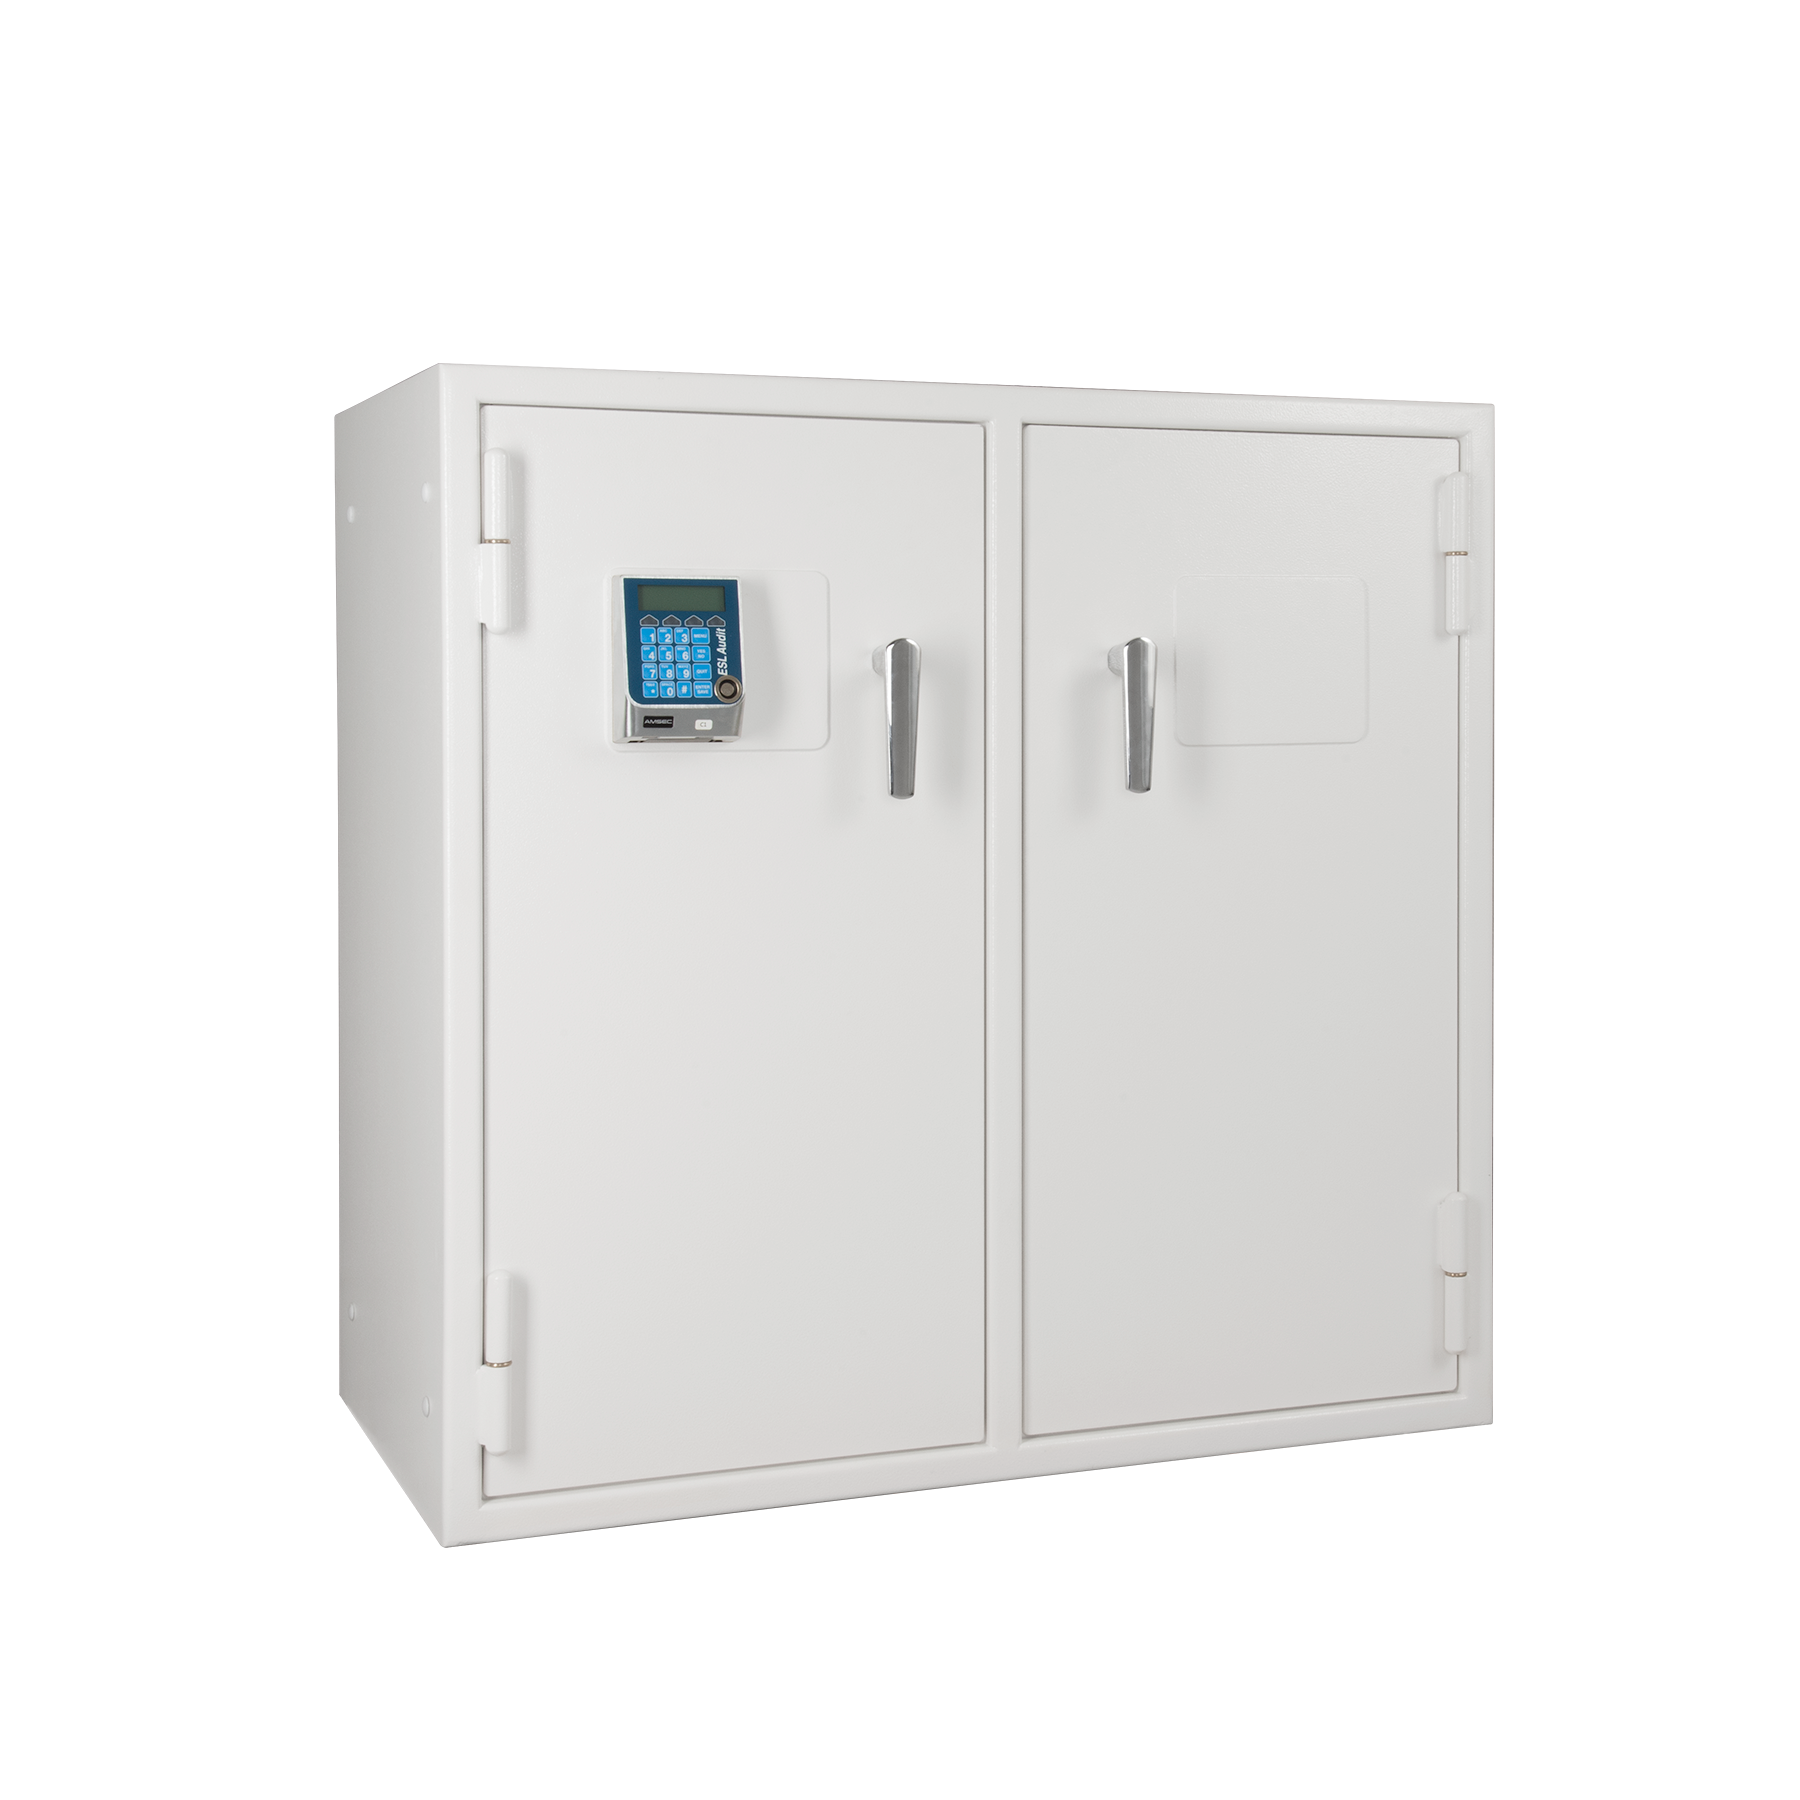 Narco 3839 Pharmacy Safe with Time Delay Lock